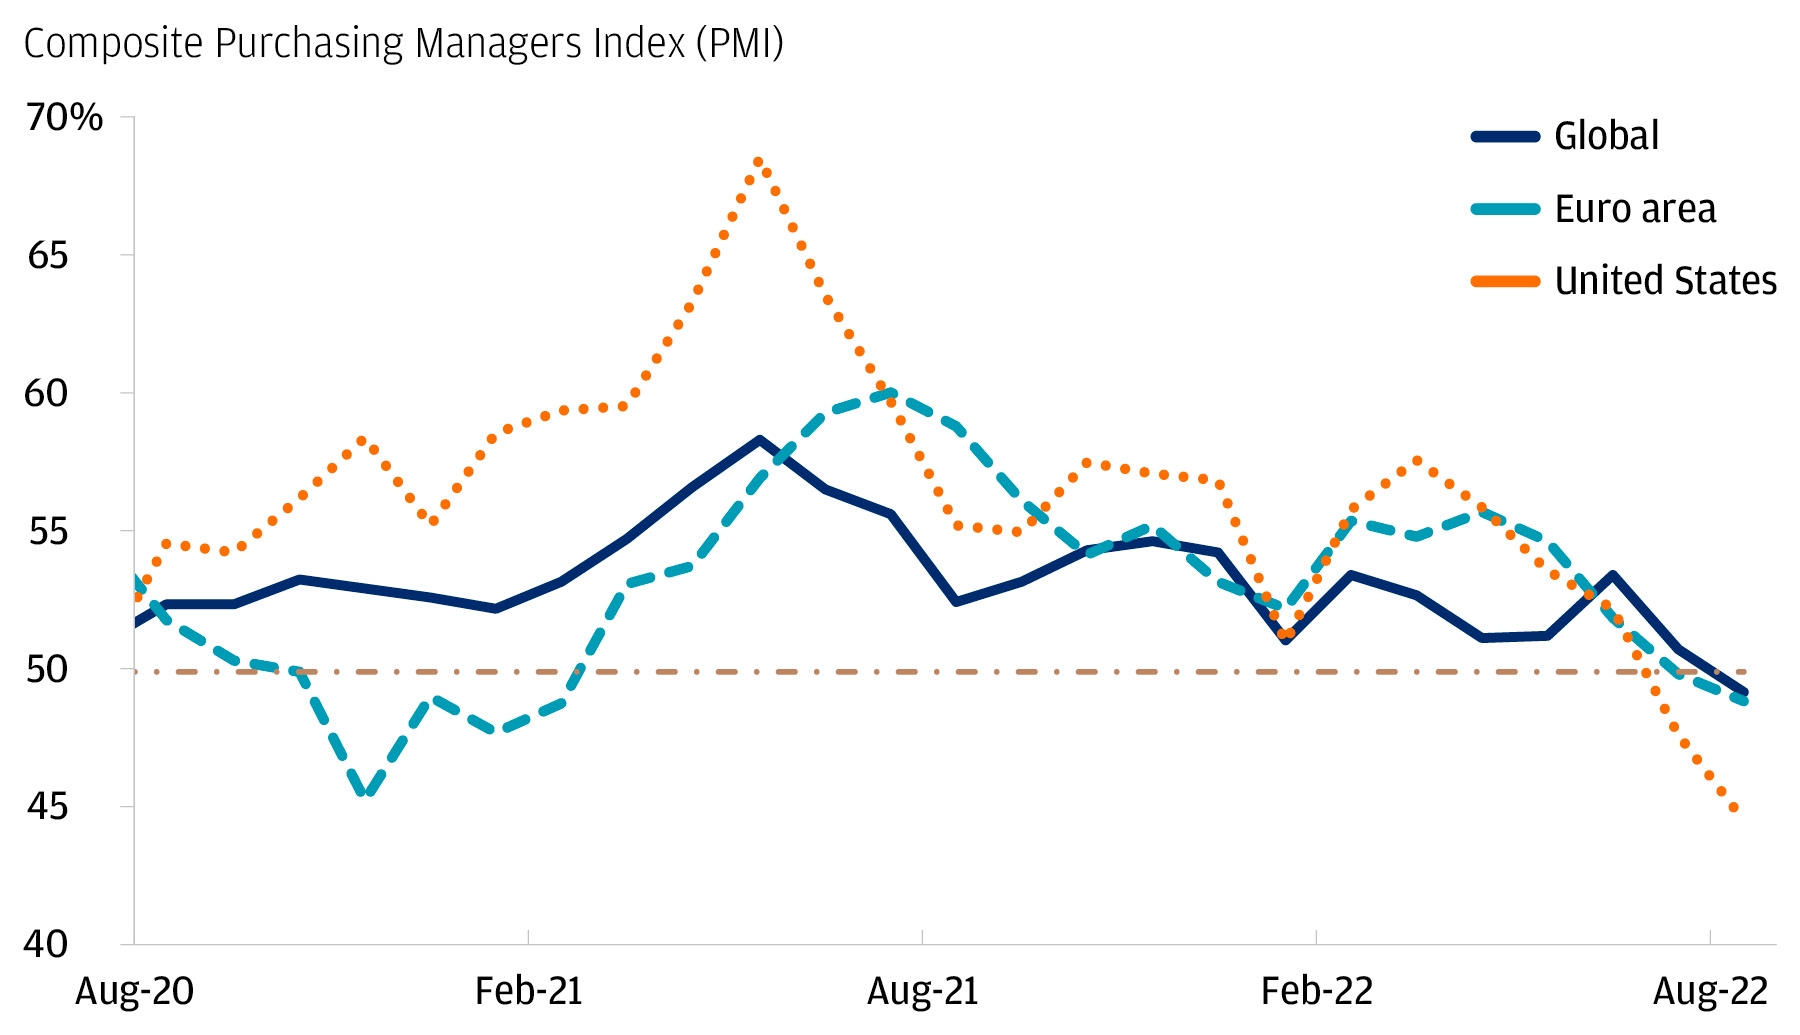 Line chart of Global, Euro area and U.S. Composite Purchasing Managers Index (PMI) data since August 2020, which shows they fell below 50 recently, indicating economic contraction.